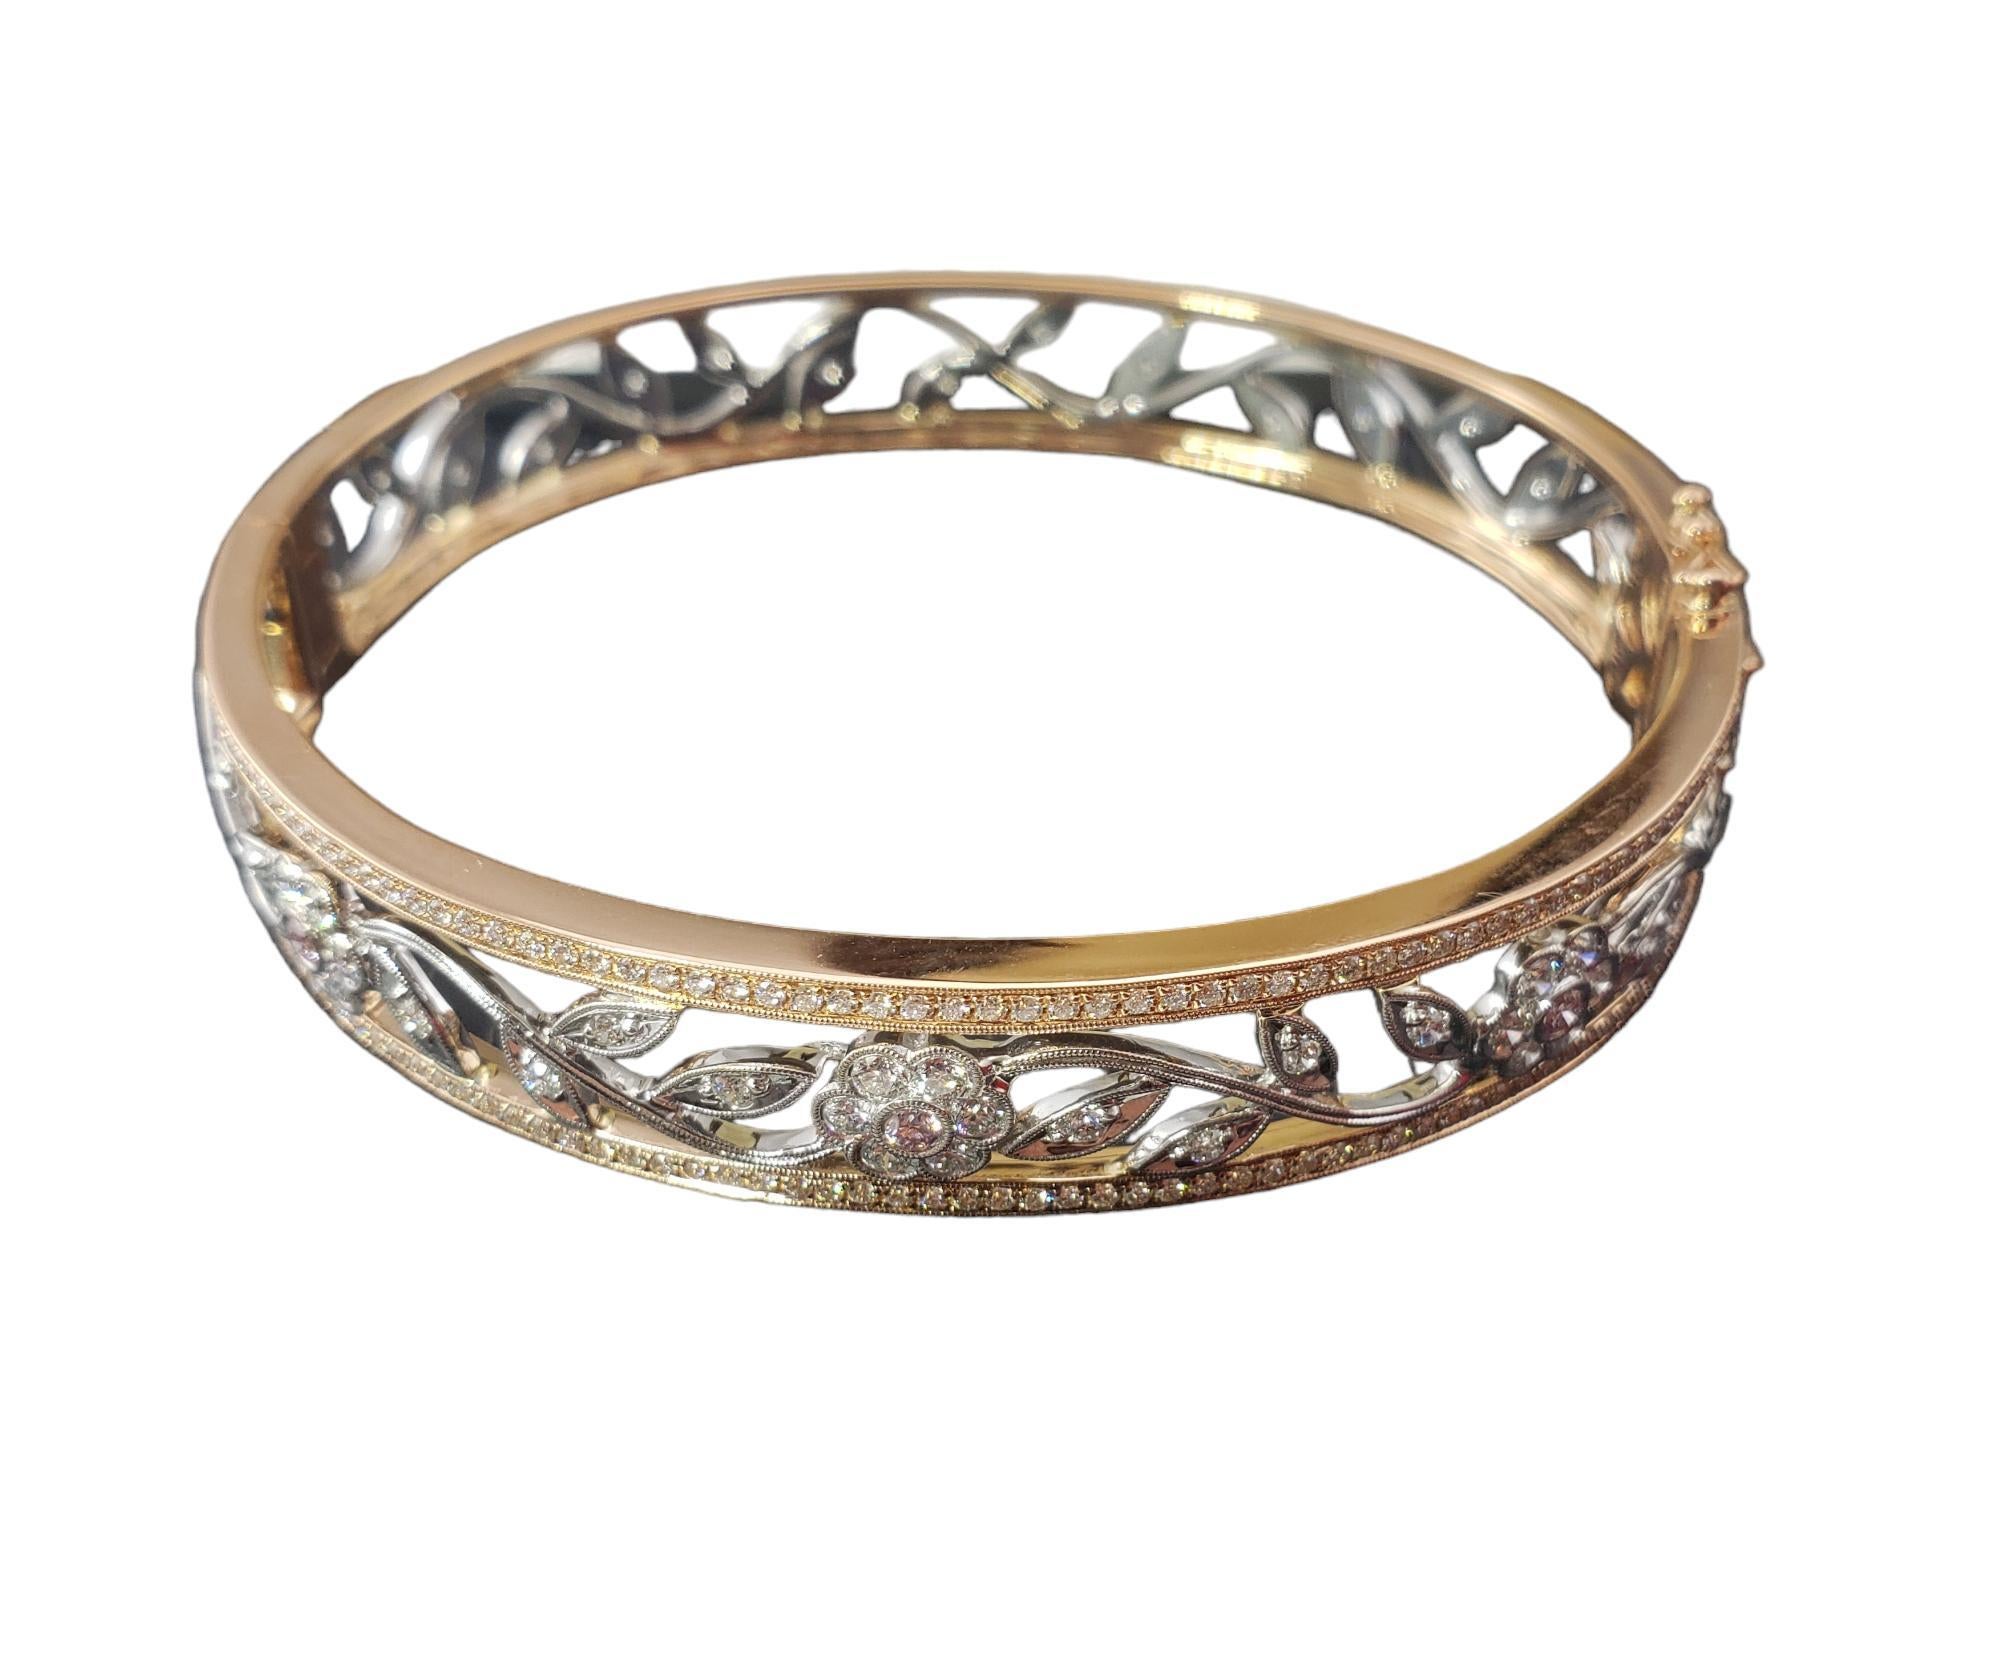 Simon G. 14K Two Tone Gold and Diamond Bangle Bracelet-

This lovely hinged 18K gold bangle bracelet by Simon G. features pink and white round brilliant cut diamonds set in a stunning floral design.  

Width: 11 mm.

Approximate total white diamond